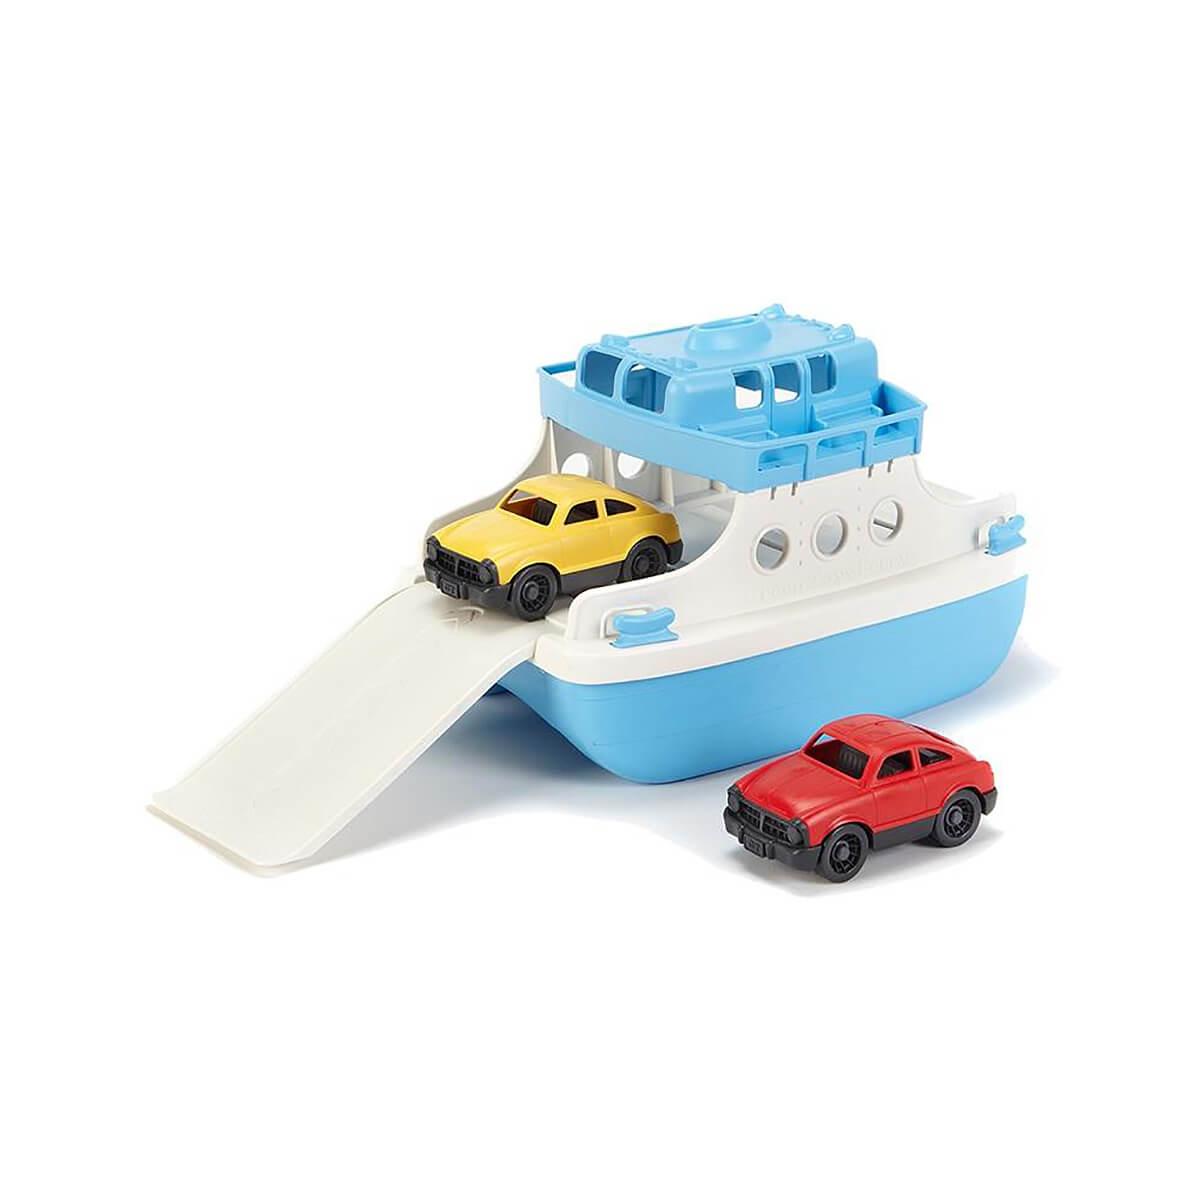  Recycled Plastic Ferry Boat Toy